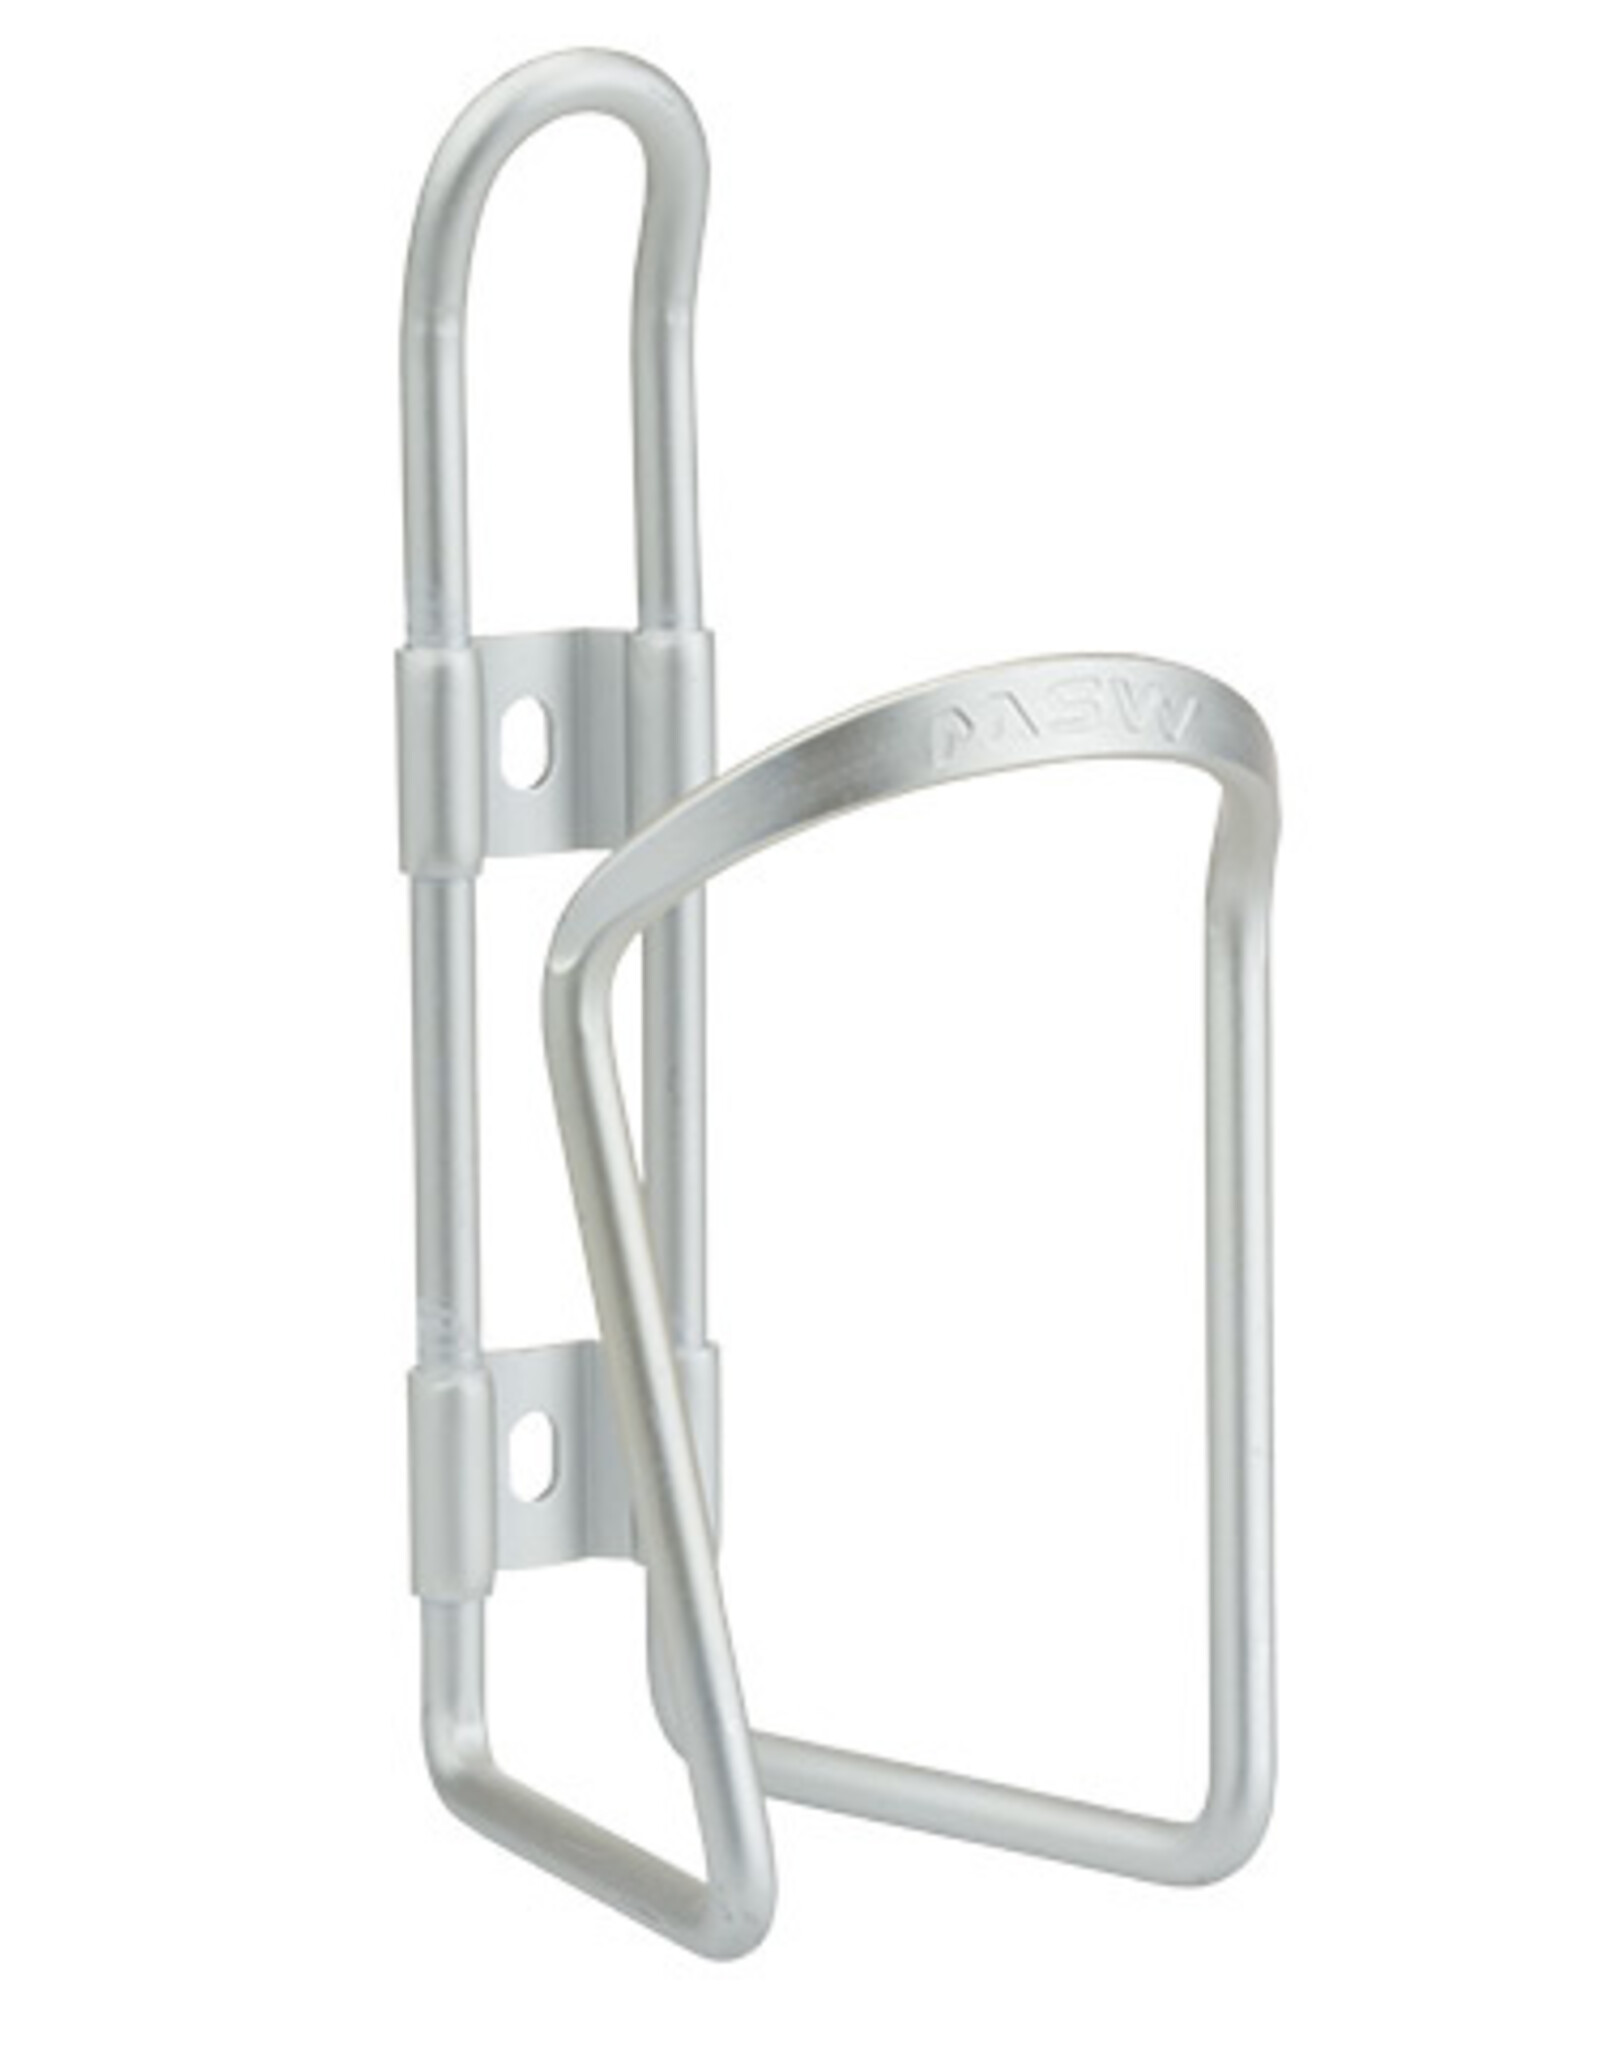 MSW MSW AC-100 Basic Water Bottle Cage: Silver